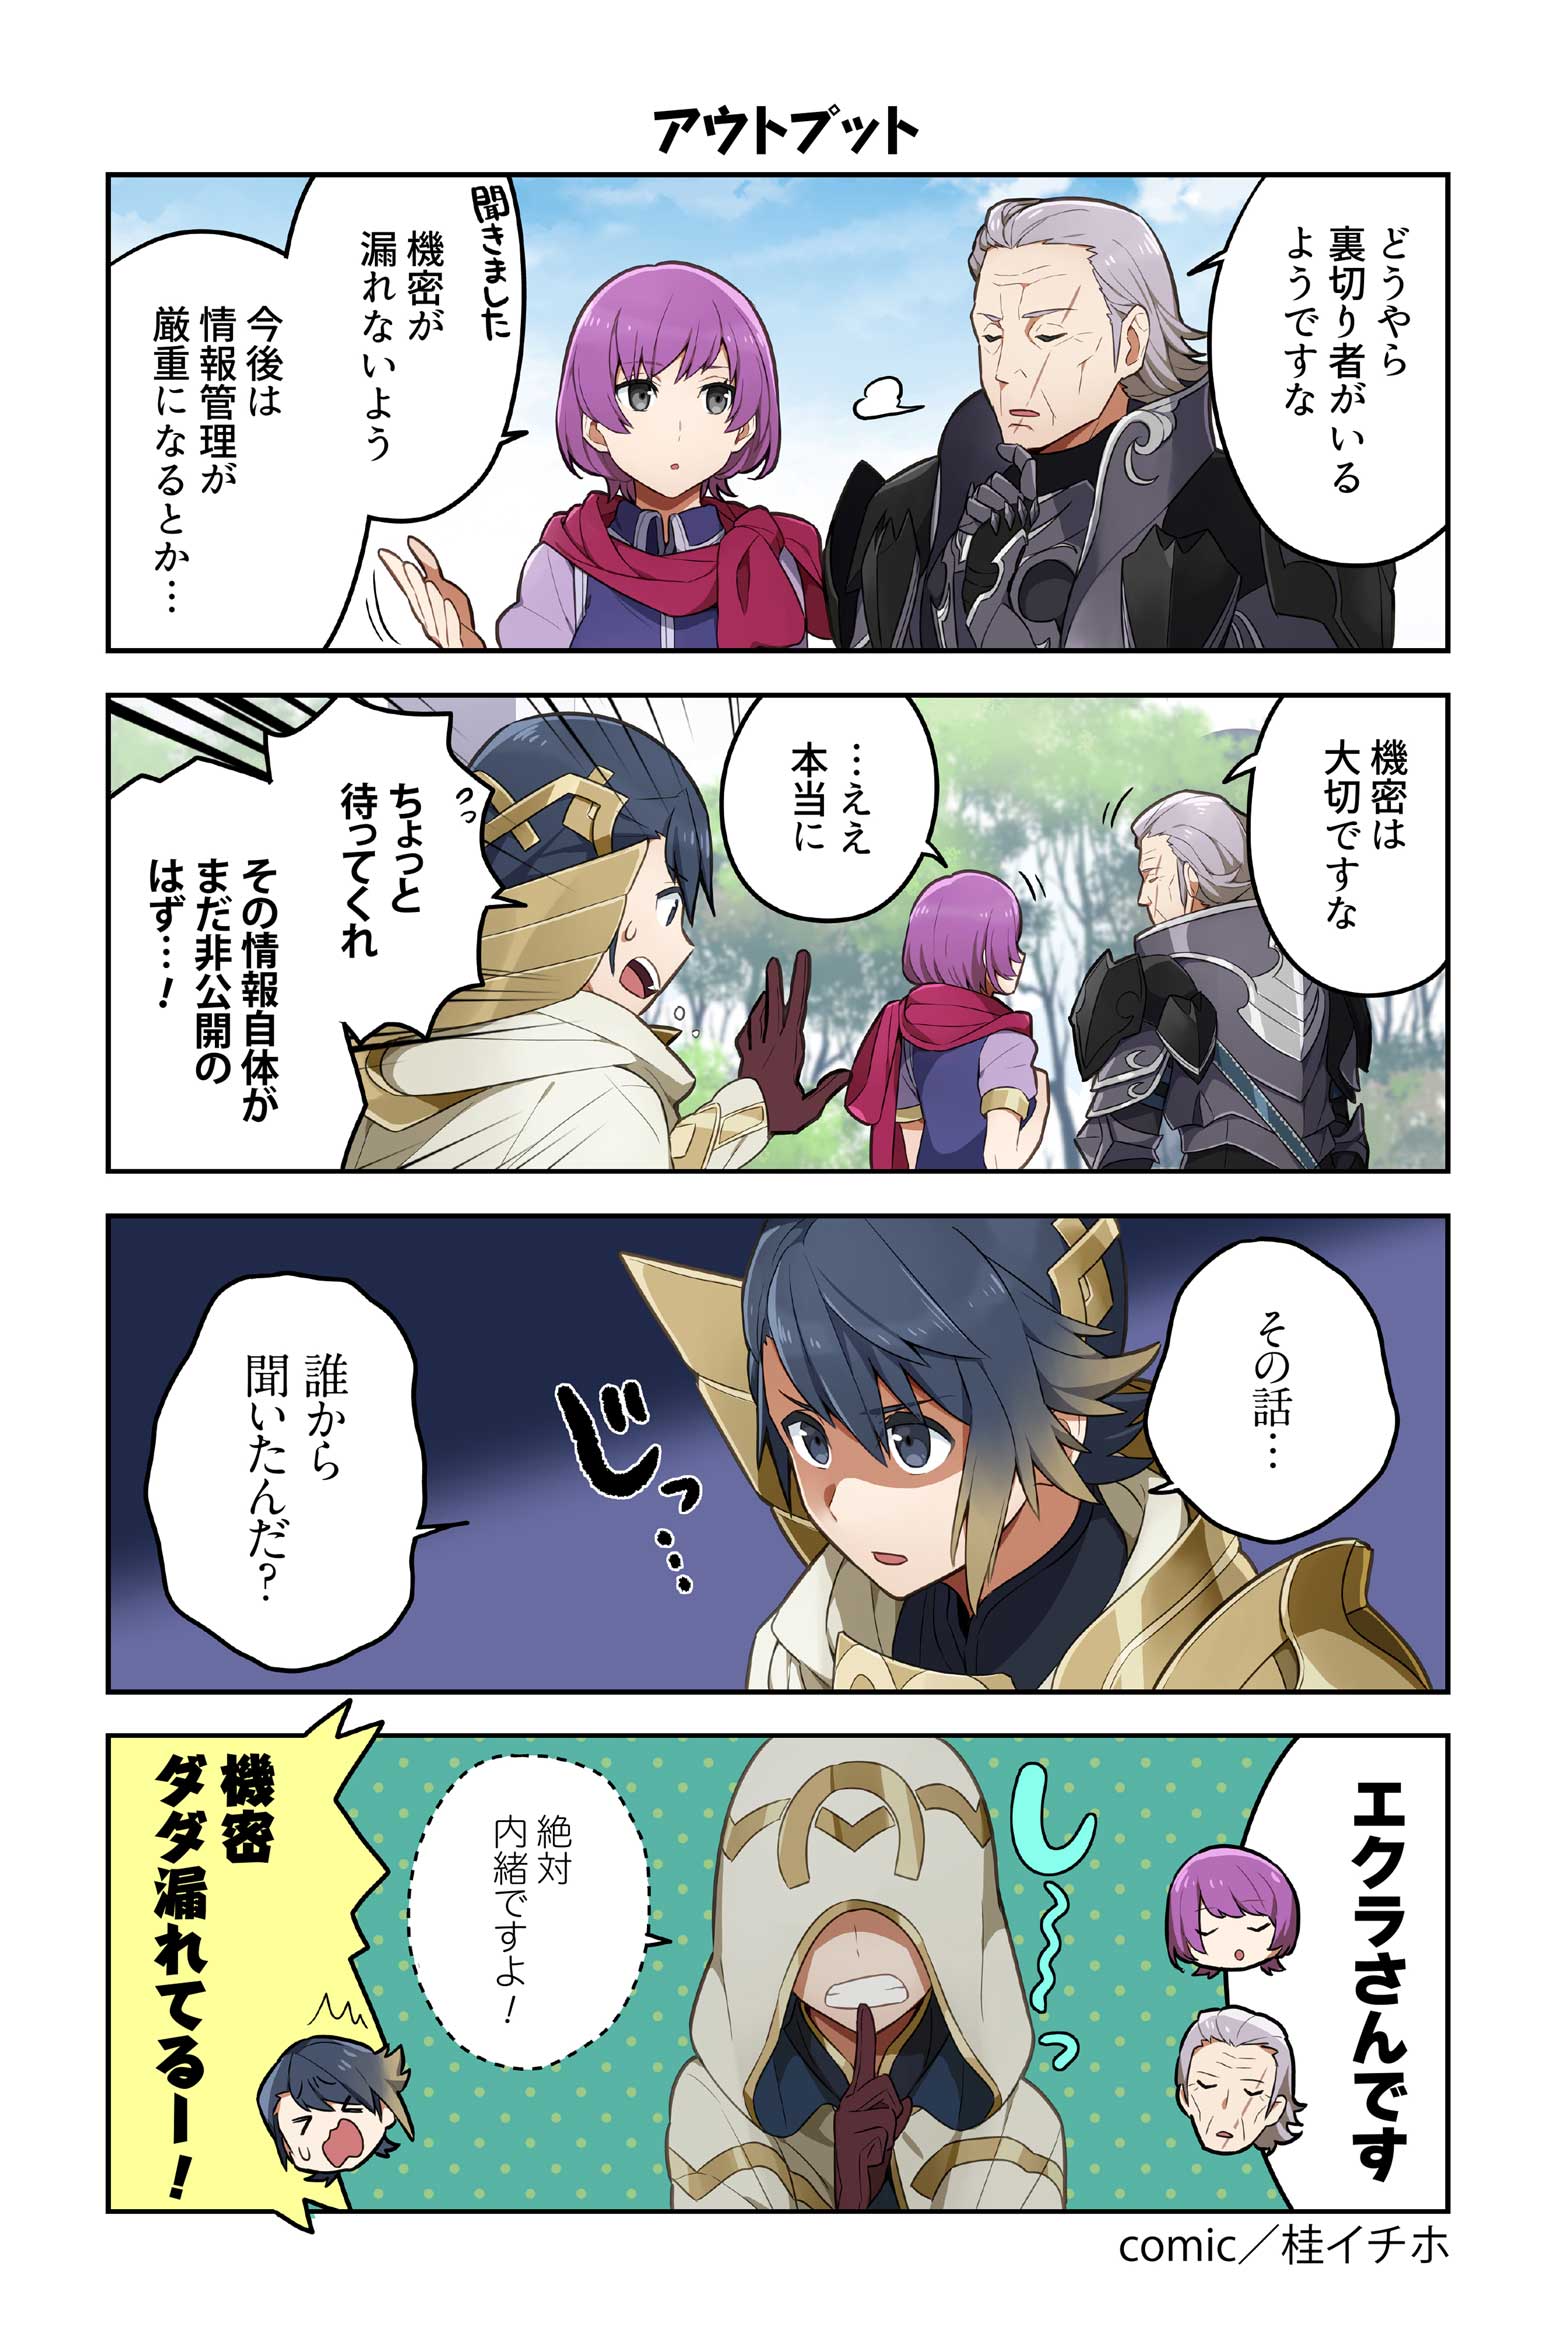 &gt;_&lt; 1girl 2boys 4koma alfonse_(fire_emblem) androgynous armor blonde_hair blue_eyes blue_hair blurry blurry_background cape chibi chibi_inset clouds comic dialogue_box dress finger_to_mouth fire_emblem fire_emblem:_shin_monshou_no_nazo fire_emblem_heroes fire_emblem_if gloves grey_eyes gunter_(fire_emblem_if) hair_ornament hand_on_own_chin highres hood juria0801 katarina_(fire_emblem) multicolored_hair multiple_boys nintendo nodding official_art open_hand open_mouth polka_dot polka_dot_background purple_hair reaching_out scar scarf short_hair short_sleeves shushing signature simple_background sky summoner_(fire_emblem_heroes) sweatdrop thinking tree two-tone_background